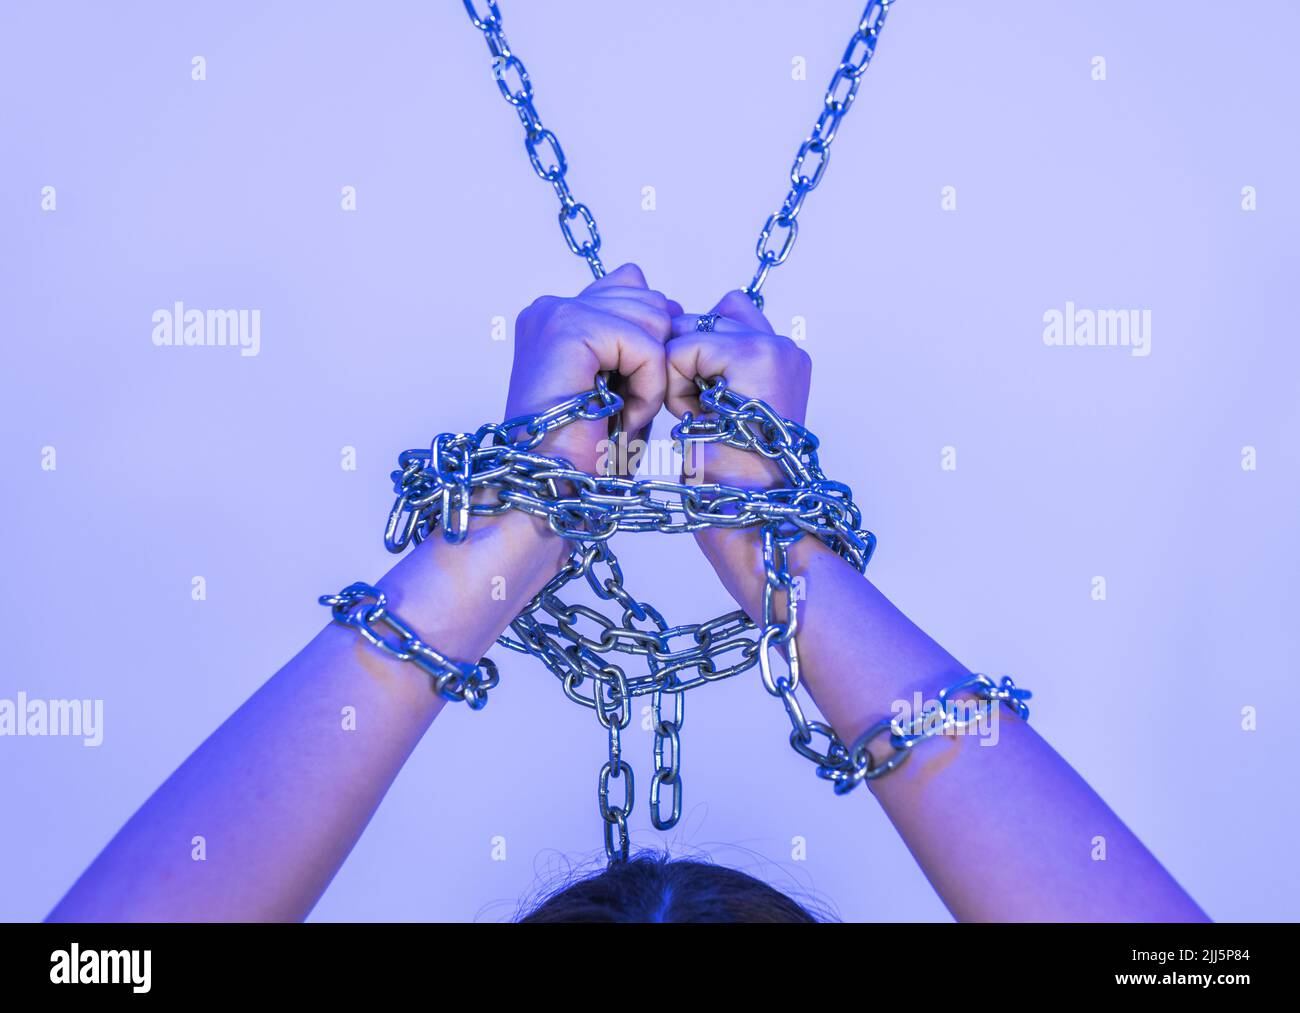 Hands of woman tied with chain Stock Photo